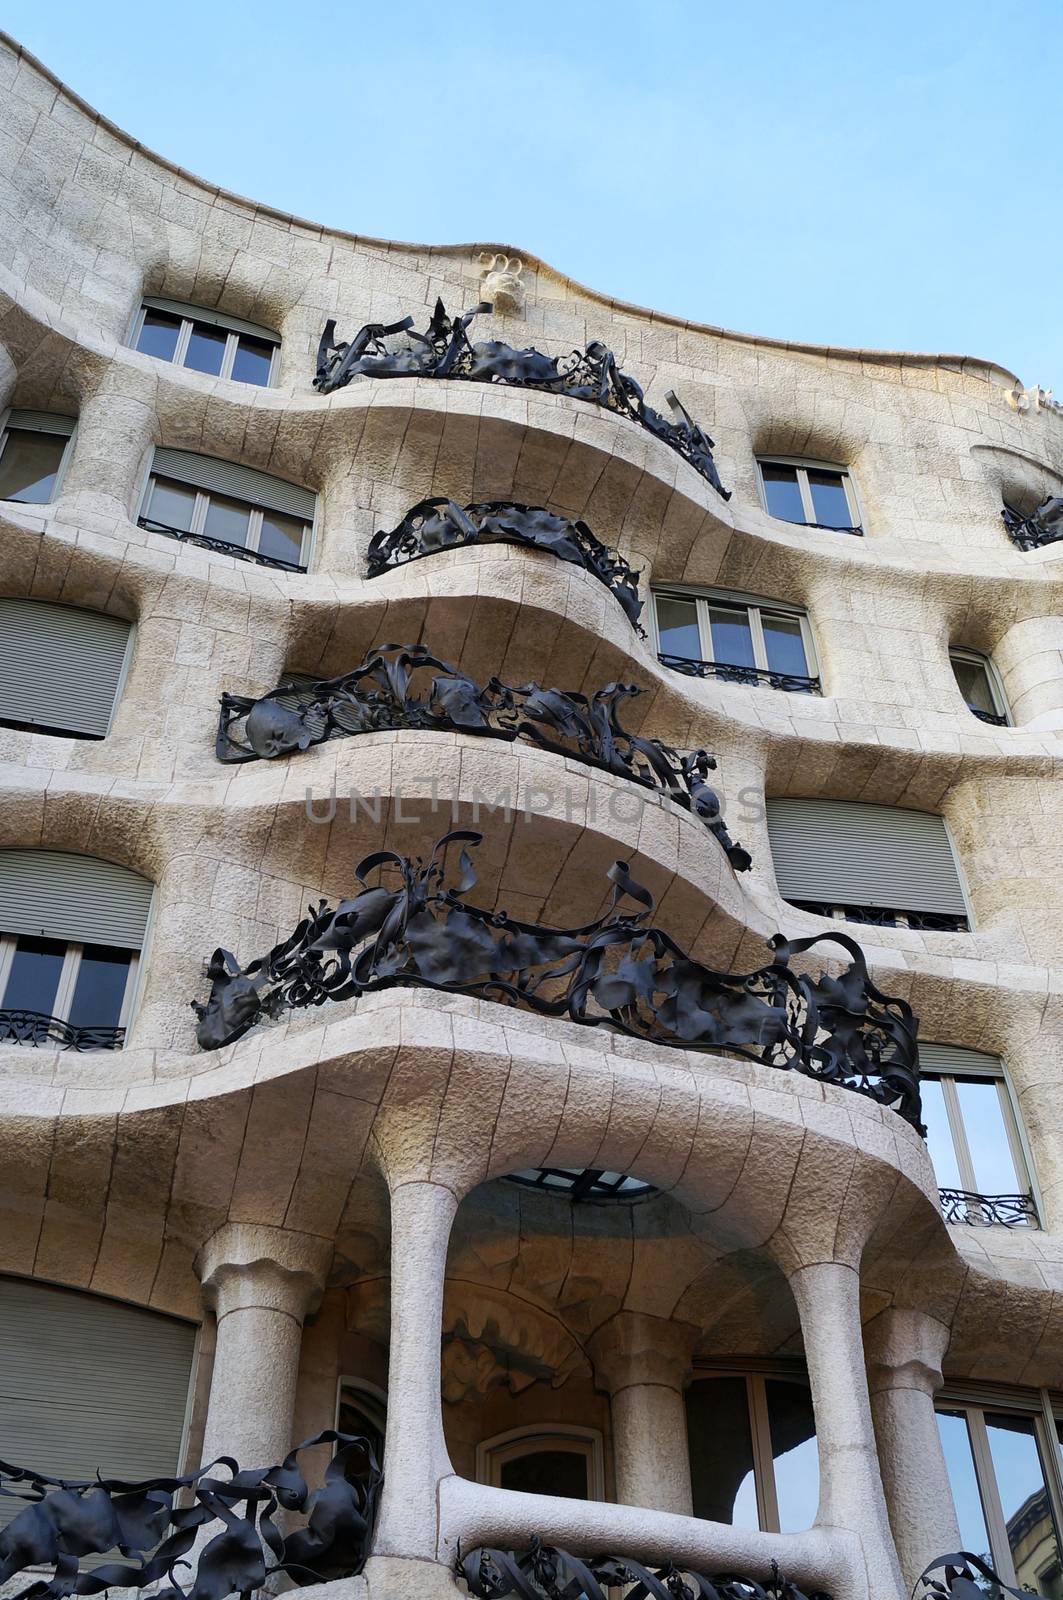 La Pedrera building by magraphics